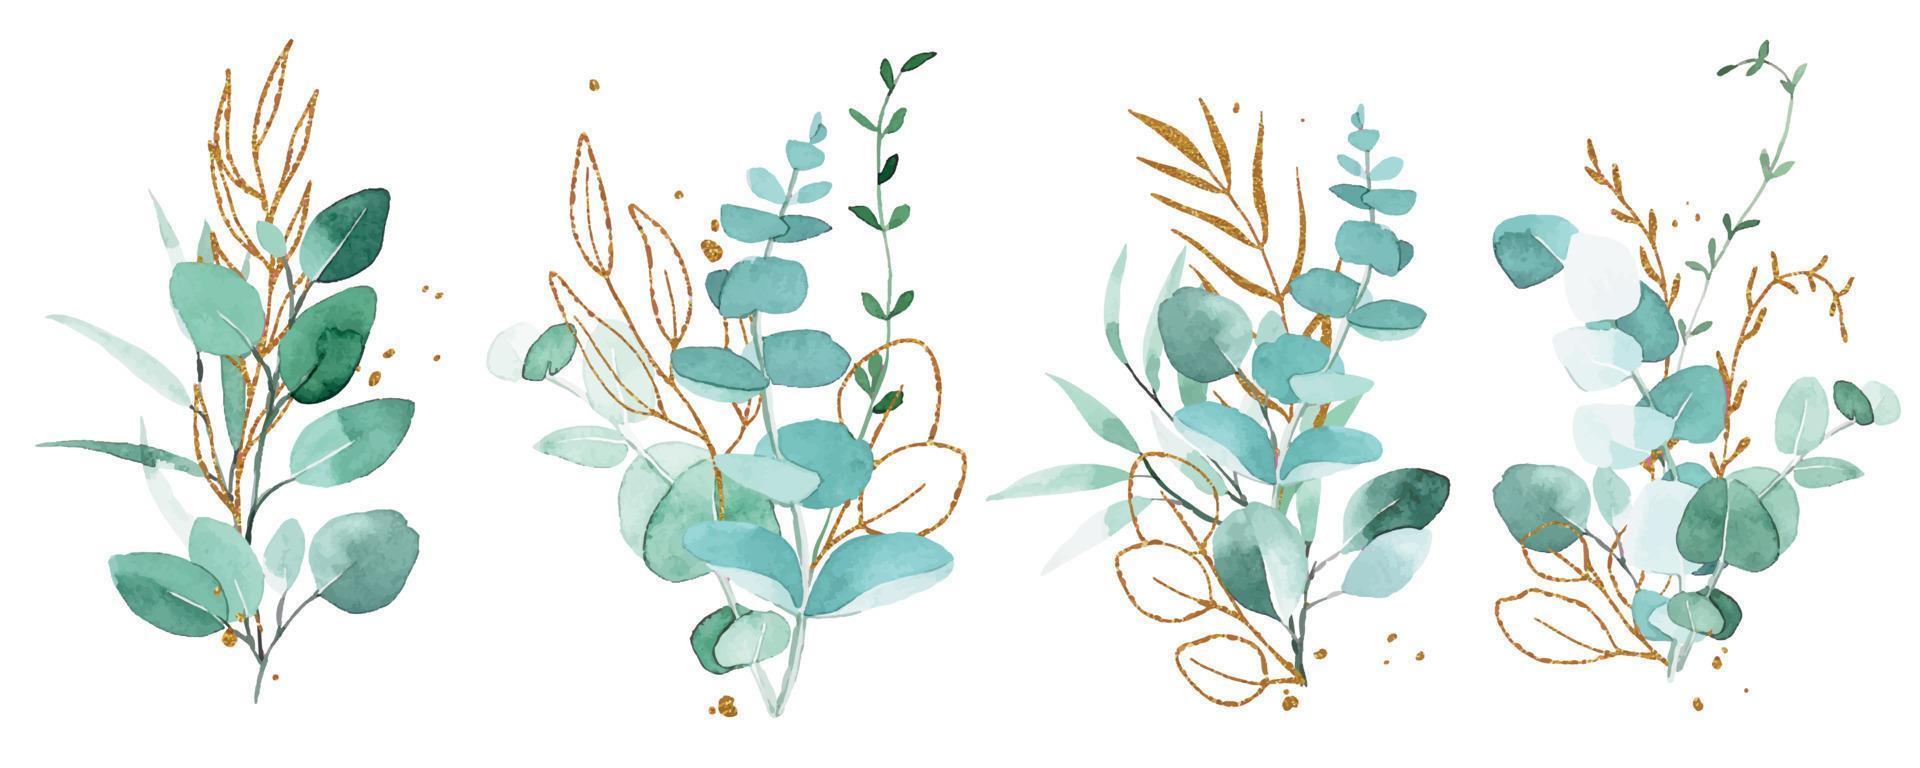 watercolor drawing. set of bouquets, compositions of eucalyptus leaves and golden elements. green and gold leaves in vintage style. vector